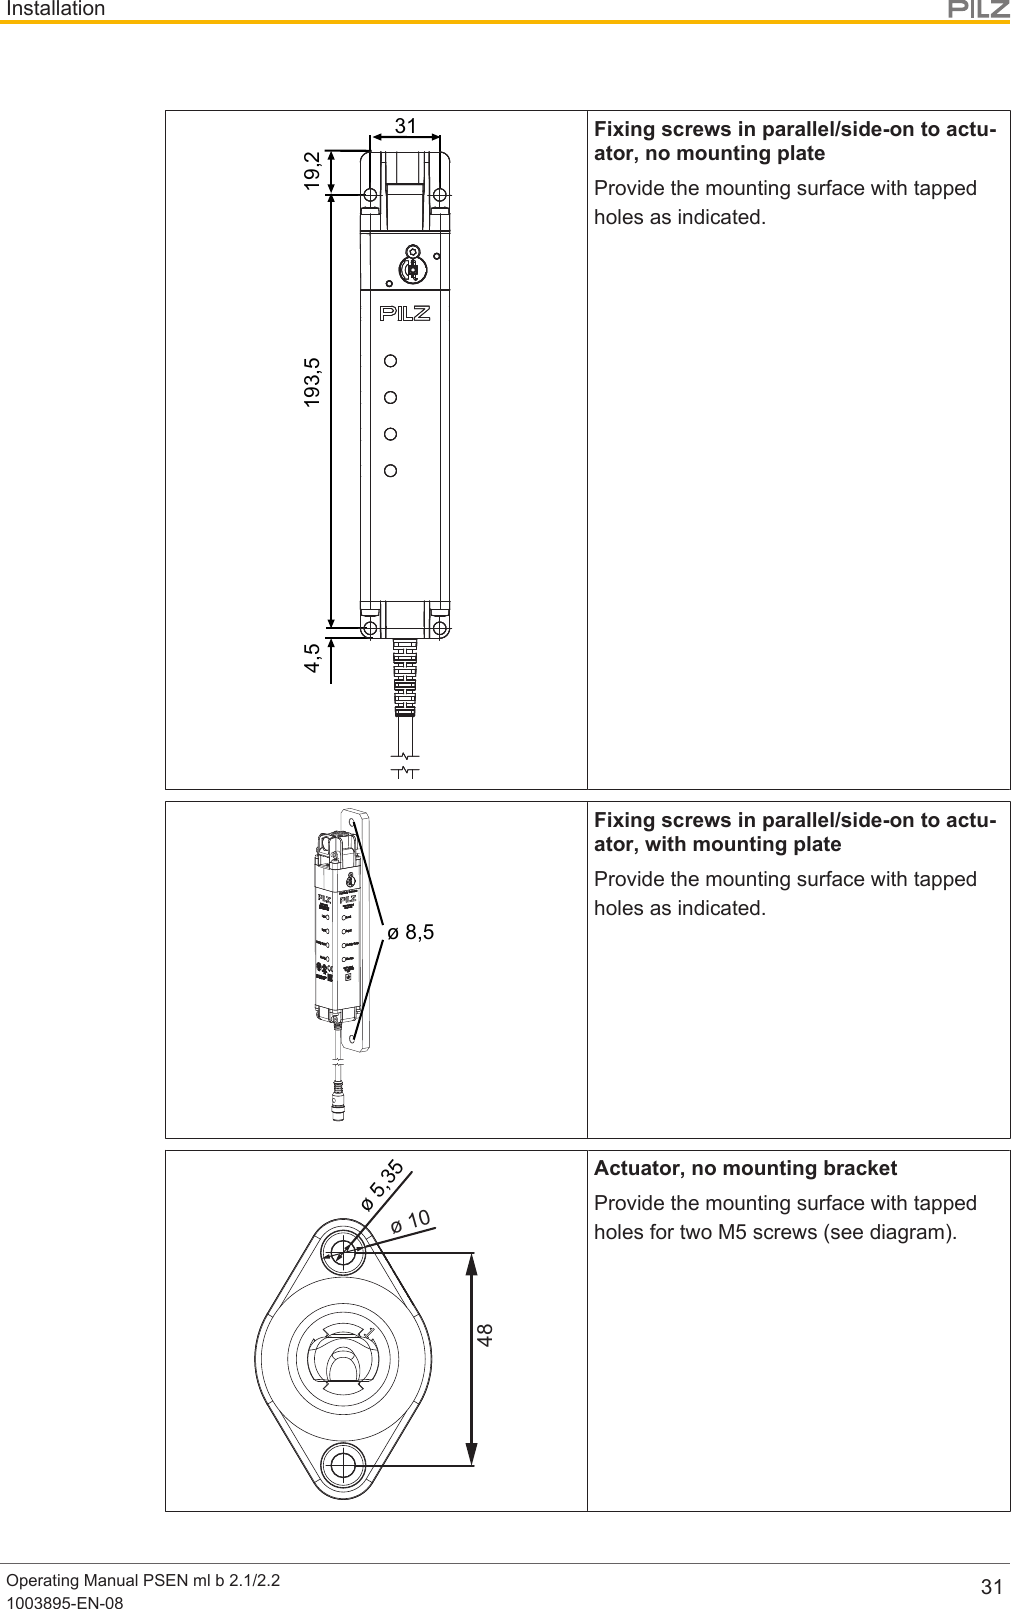 InstallationOperating Manual PSEN ml b 2.1/2.21003895-EN-08 313119,2193,54,5Fixing screws in parallel/side-on to actu-ator, no mounting plateProvide the mounting surface with tappedholes as indicated.ø 8,5Fixing screws in parallel/side-on to actu-ator, with mounting plateProvide the mounting surface with tappedholes as indicated.ø 5,35ø 1048Actuator, no mounting bracketProvide the mounting surface with tappedholes for two M5 screws (see diagram).